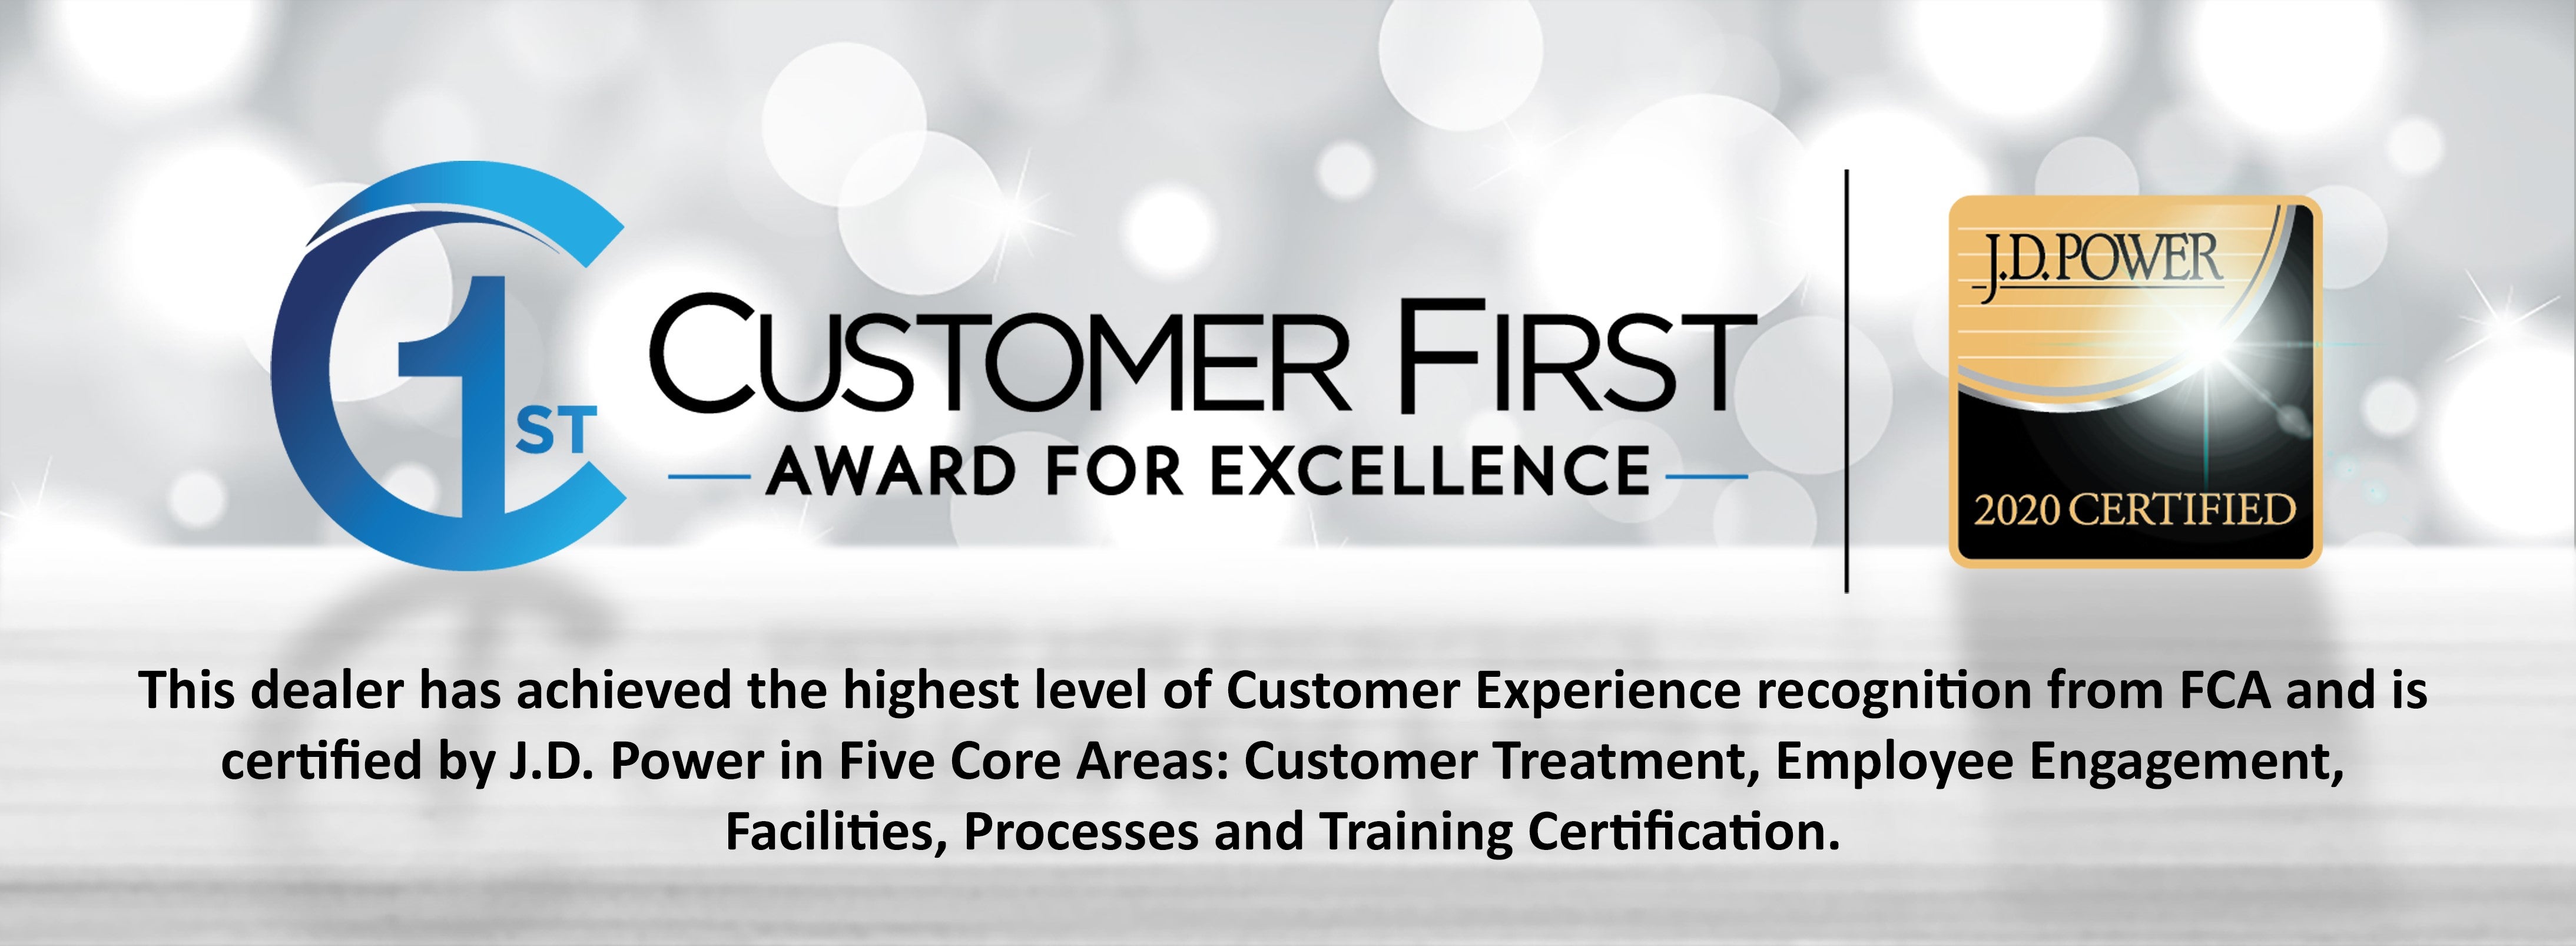 Customer First Award for Excellence for 2019 at Torkelson-Waukon in Waukon, IA